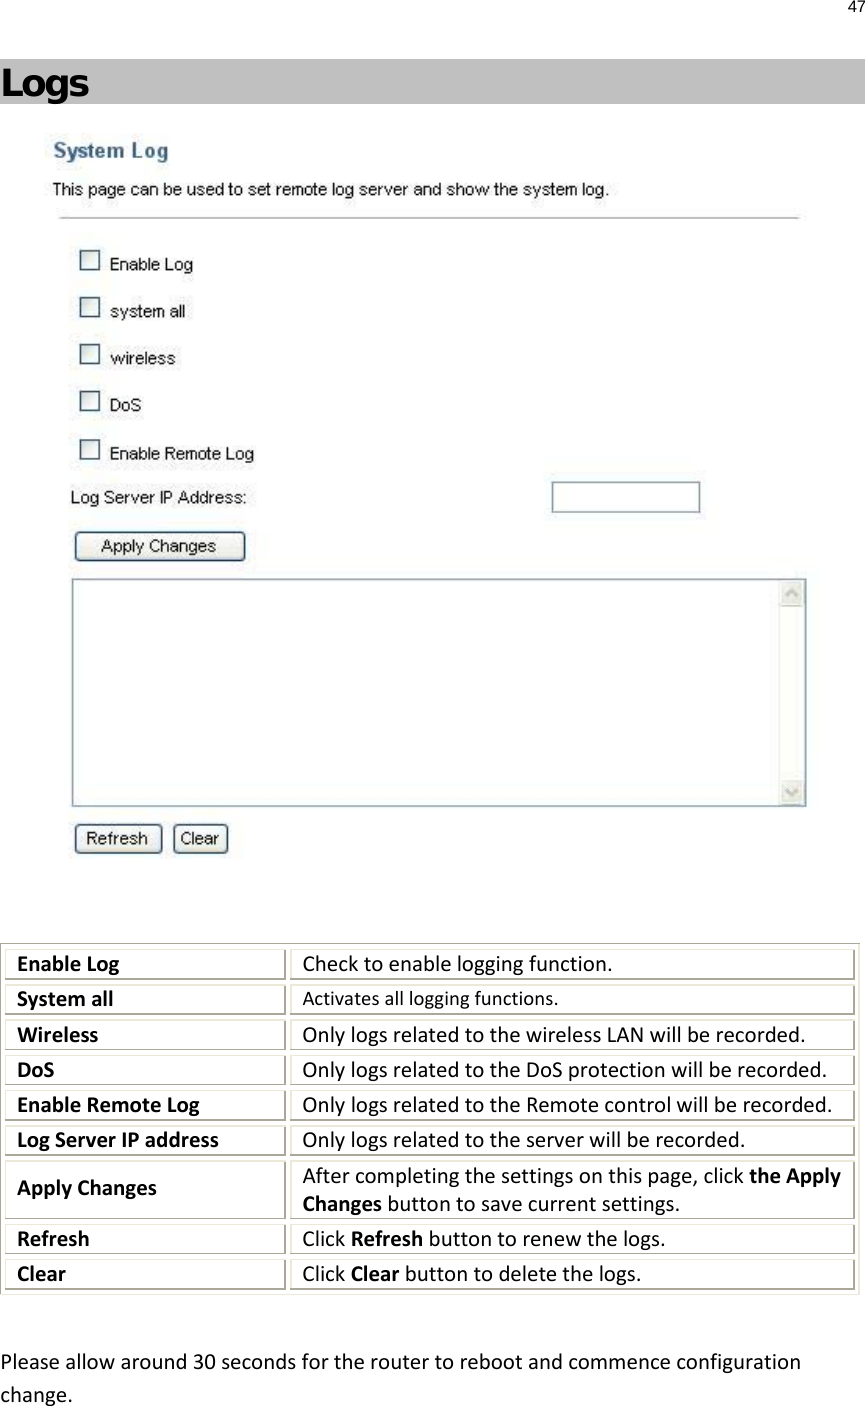 47  Logs   Enable Log Check to enable logging function. System all  Activates all logging functions. Wireless  Only logs related to the wireless LAN will be recorded. DoS  Only logs related to the DoS protection will be recorded. Enable Remote Log Only logs related to the Remote control will be recorded. Log Server IP address Only logs related to the server will be recorded. Apply Changes After completing the settings on this page, click the Apply Changes button to save current settings. Refresh Click Refresh button to renew the logs. Clear Click Clear button to delete the logs.  Please allow around 30 seconds for the router to reboot and commence configuration change.   